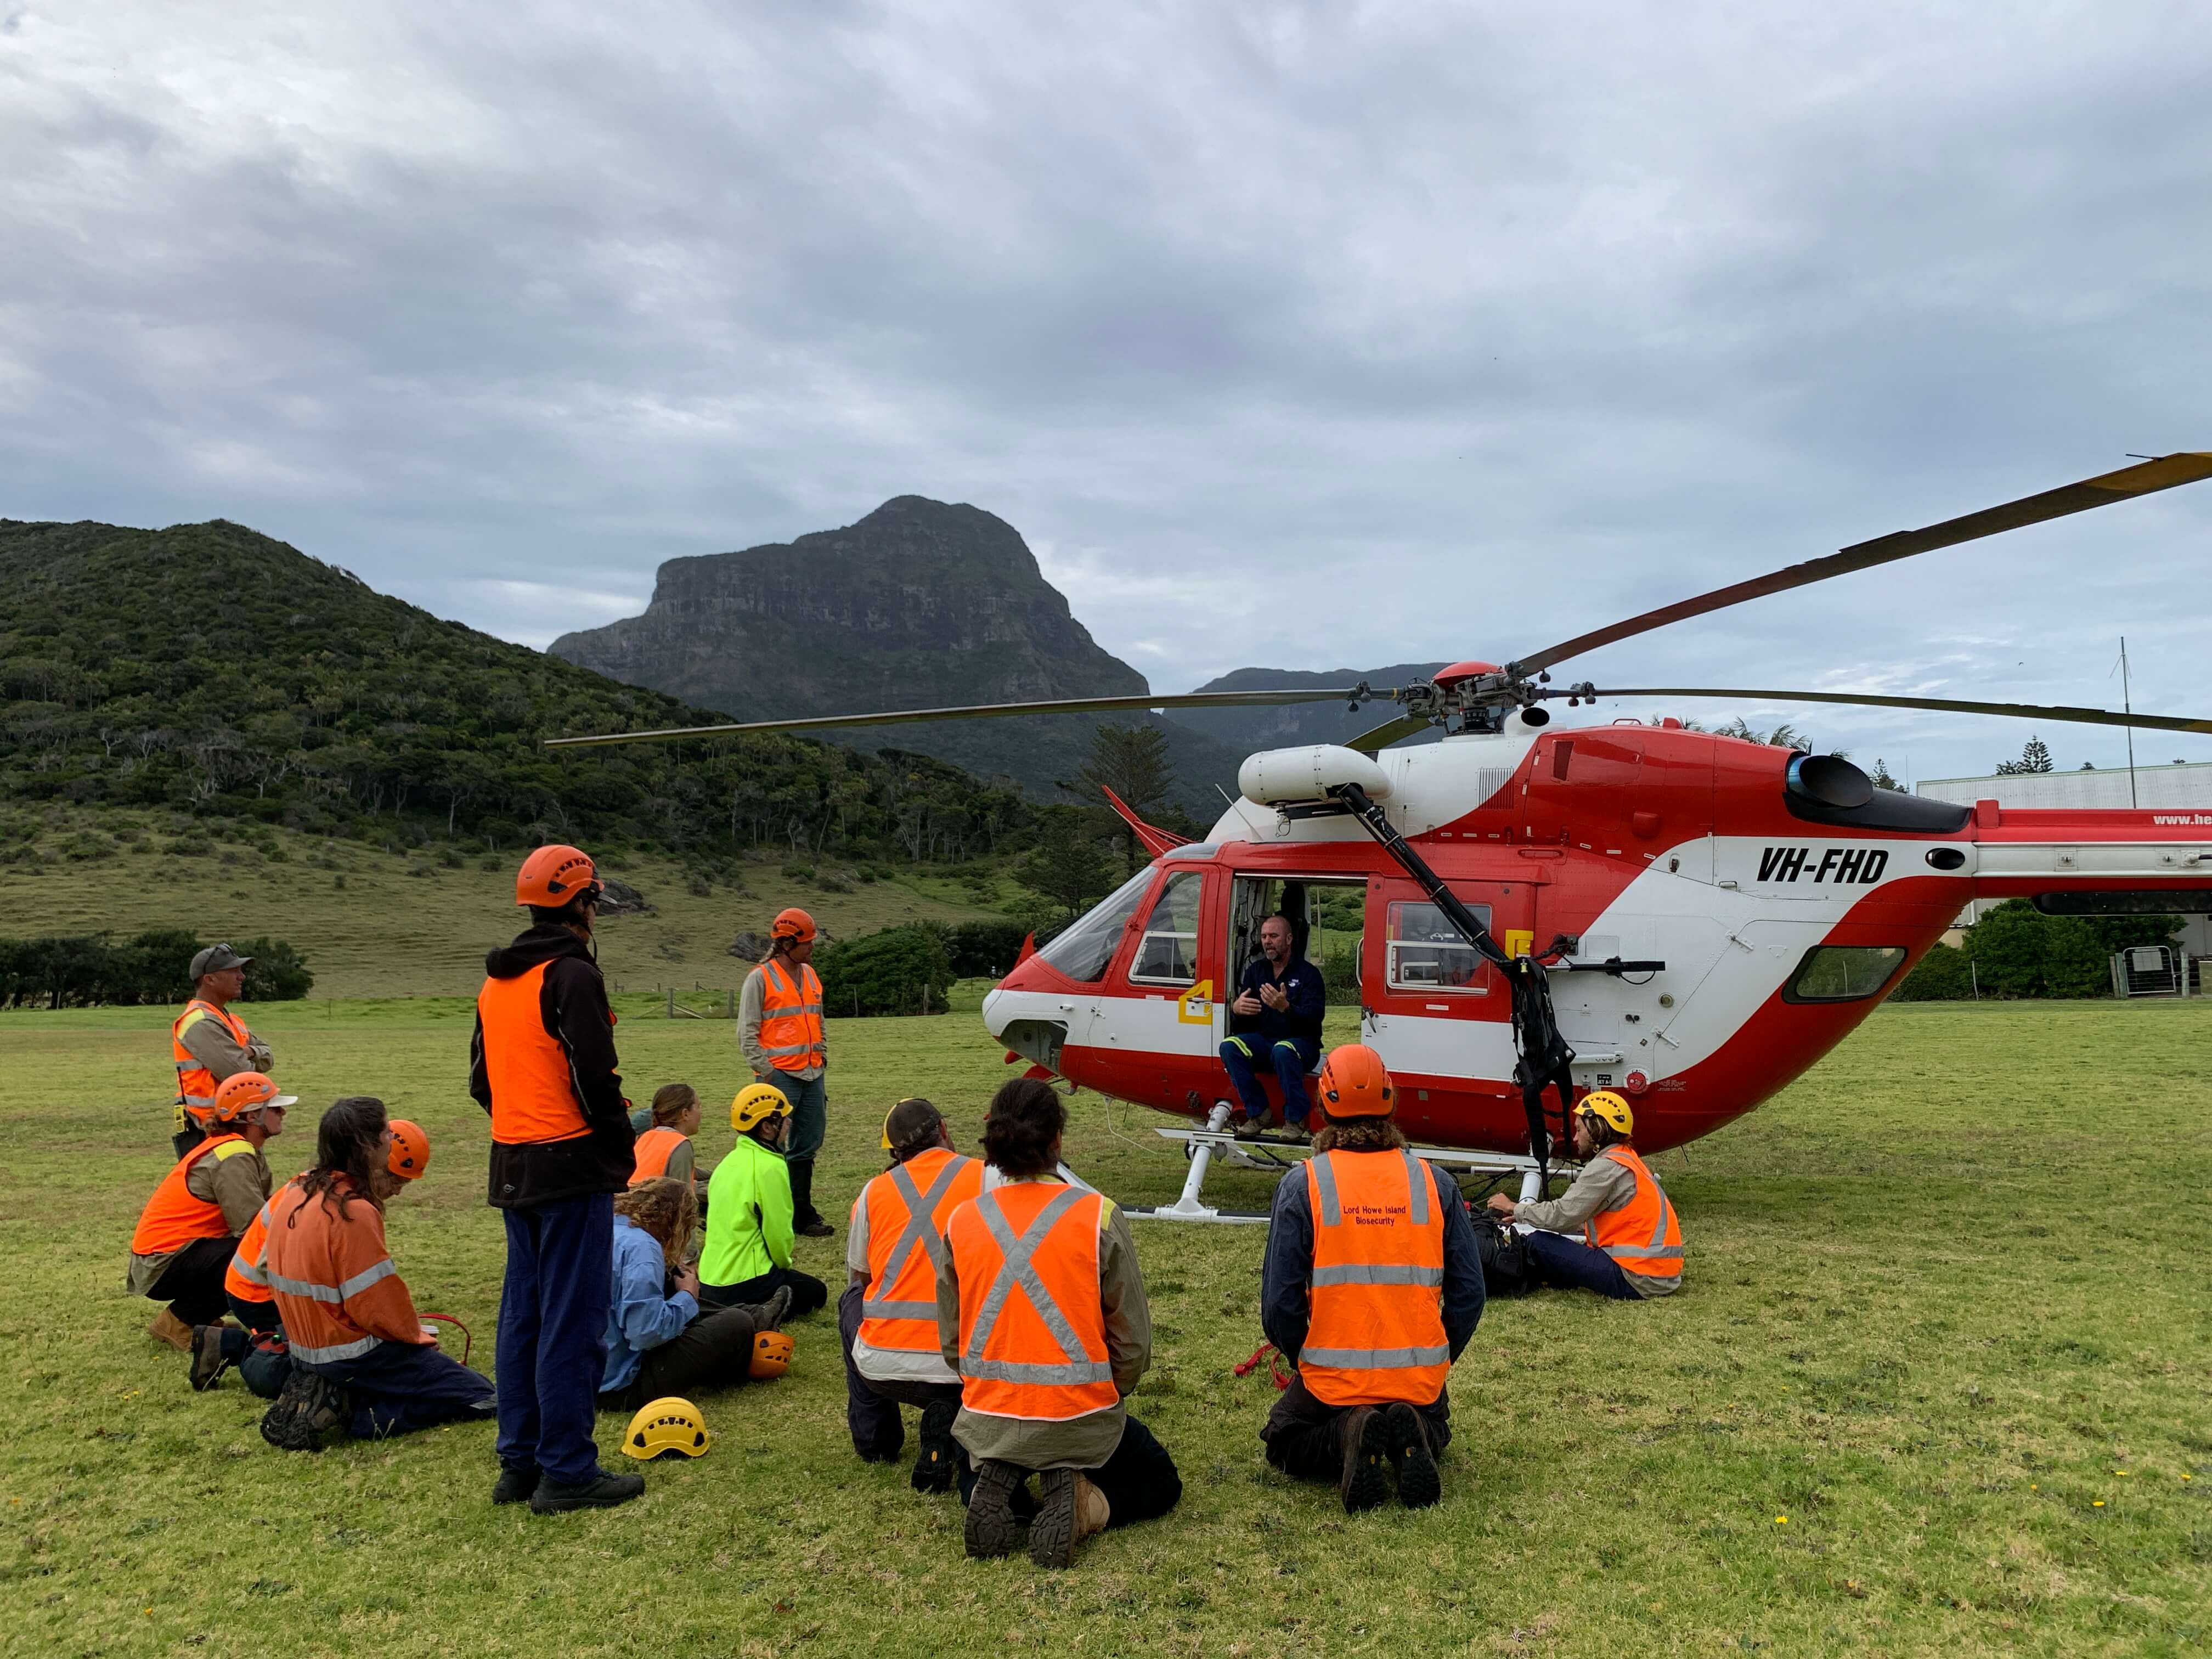 A group of people in orange high-vis vests sitting around a helicopter